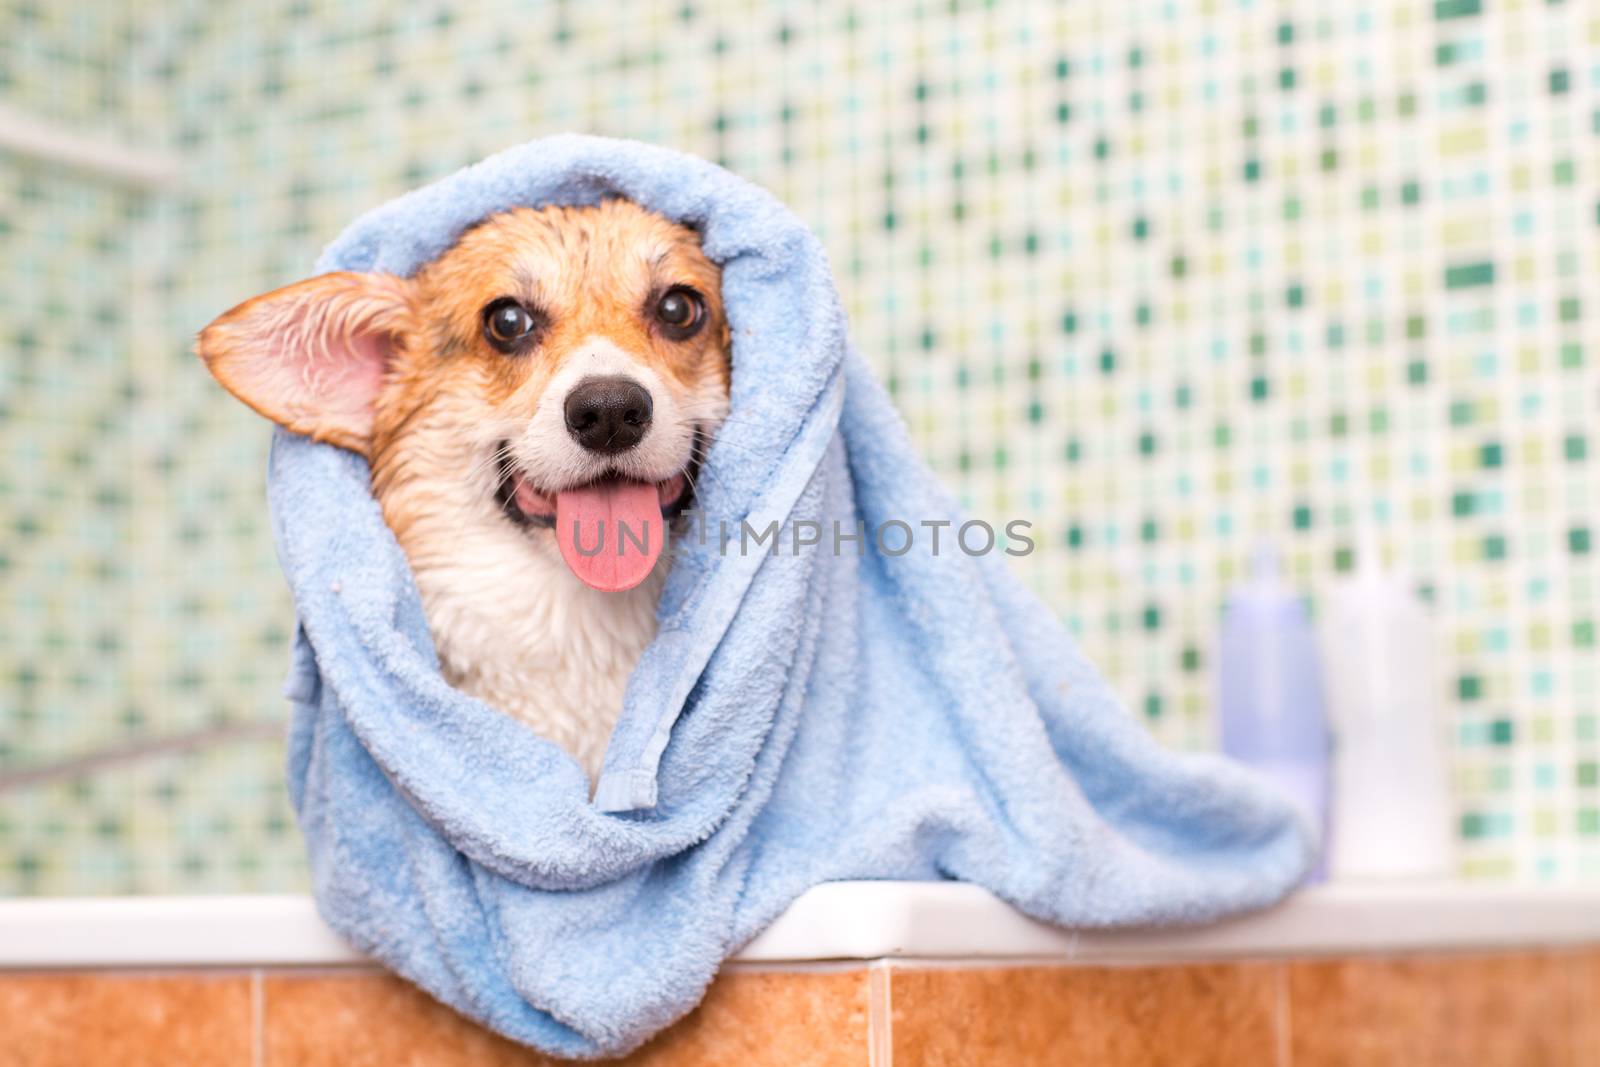 Corgi dog with towel after wash in the bathroom.